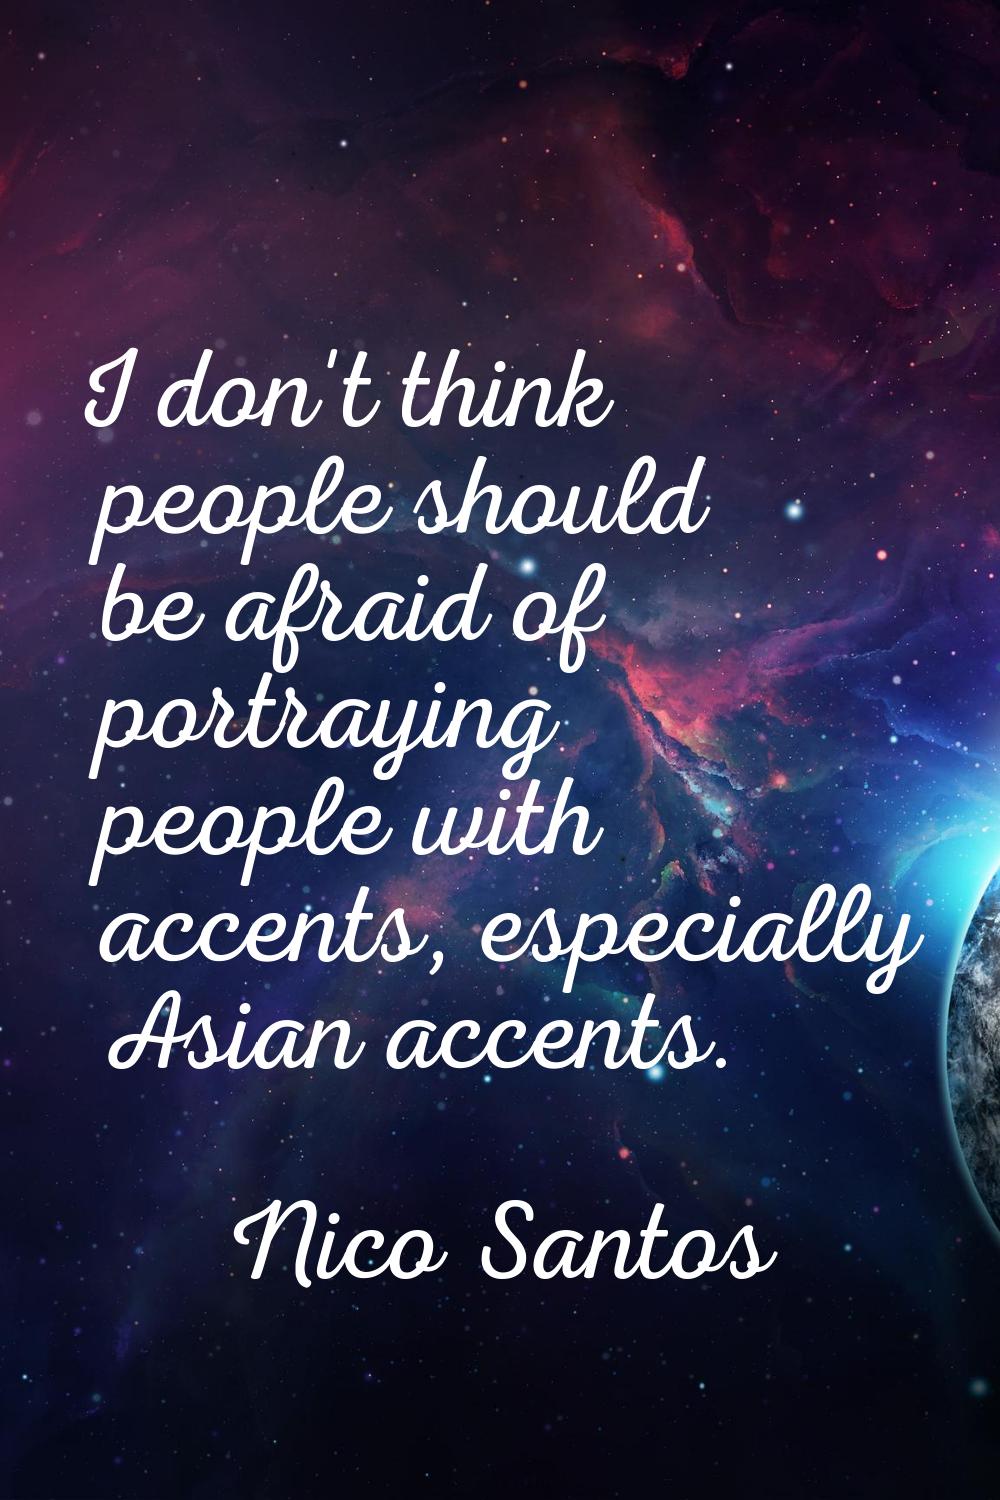 I don't think people should be afraid of portraying people with accents, especially Asian accents.